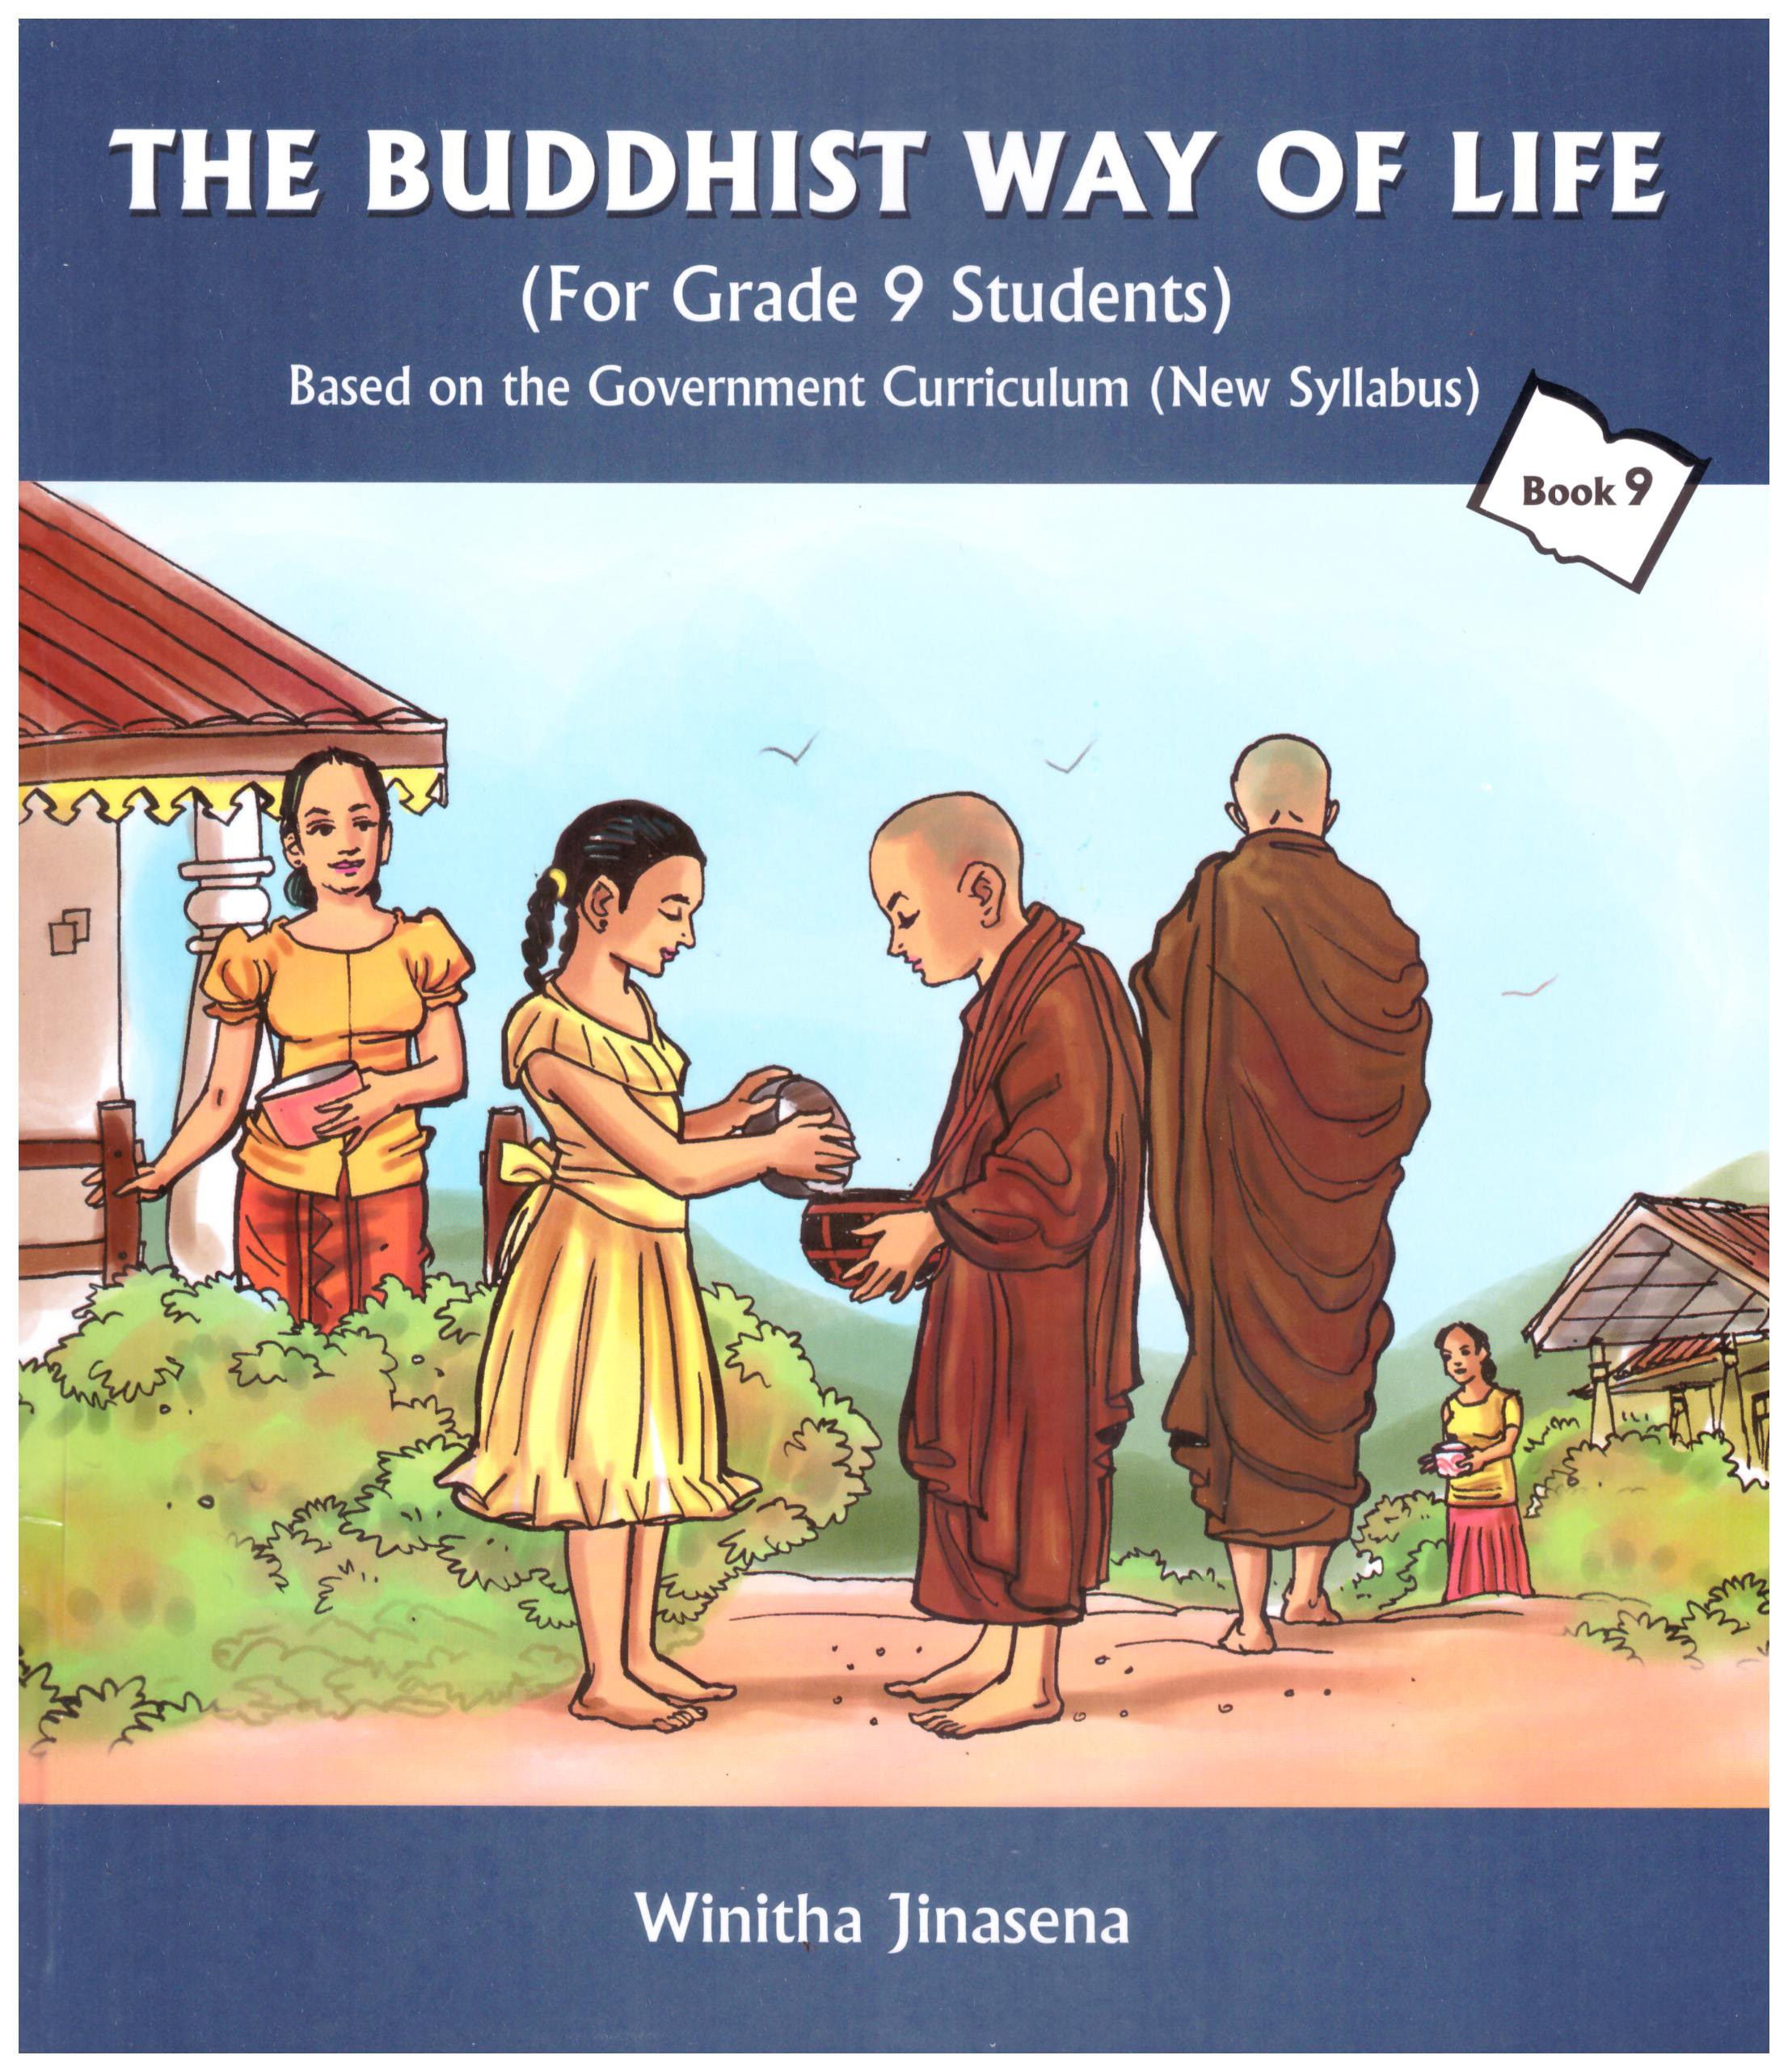 The Buddhist Way of Life Book 9